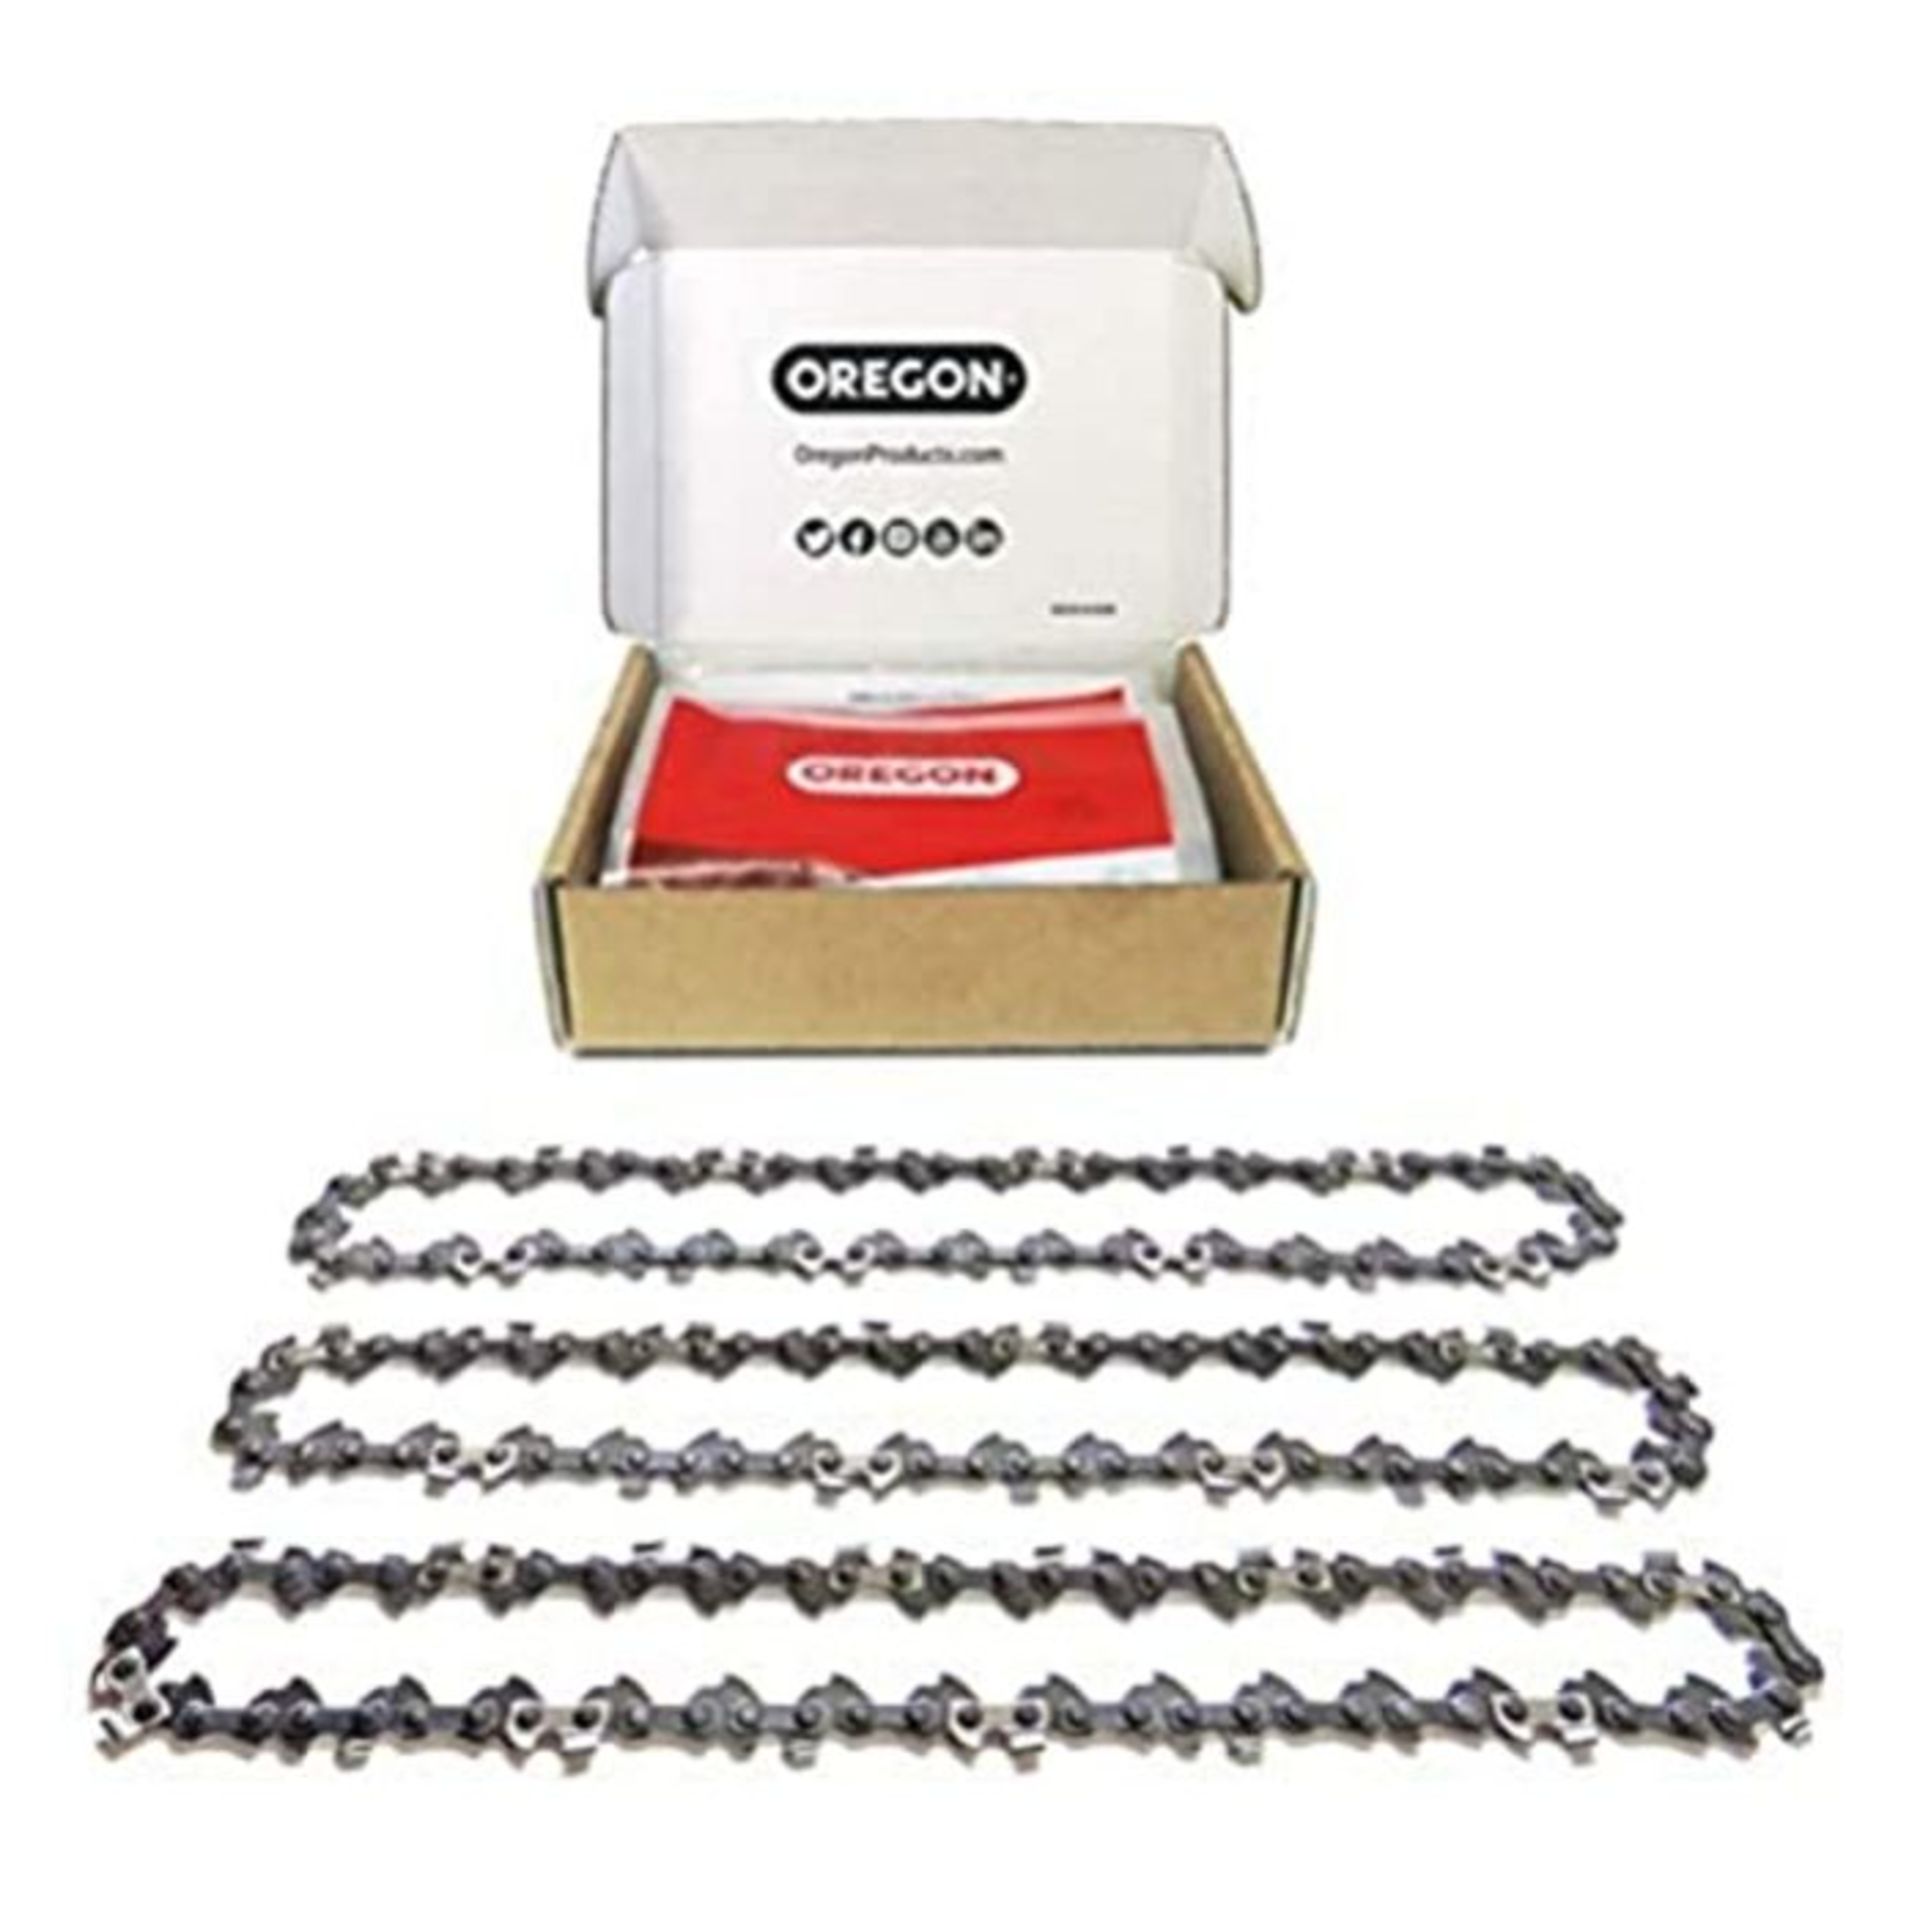 Oregon 3-Pack Pole Saw Chains for 10-Inch (25 cm) Bar - 40 Drive Links â¬  low-ki